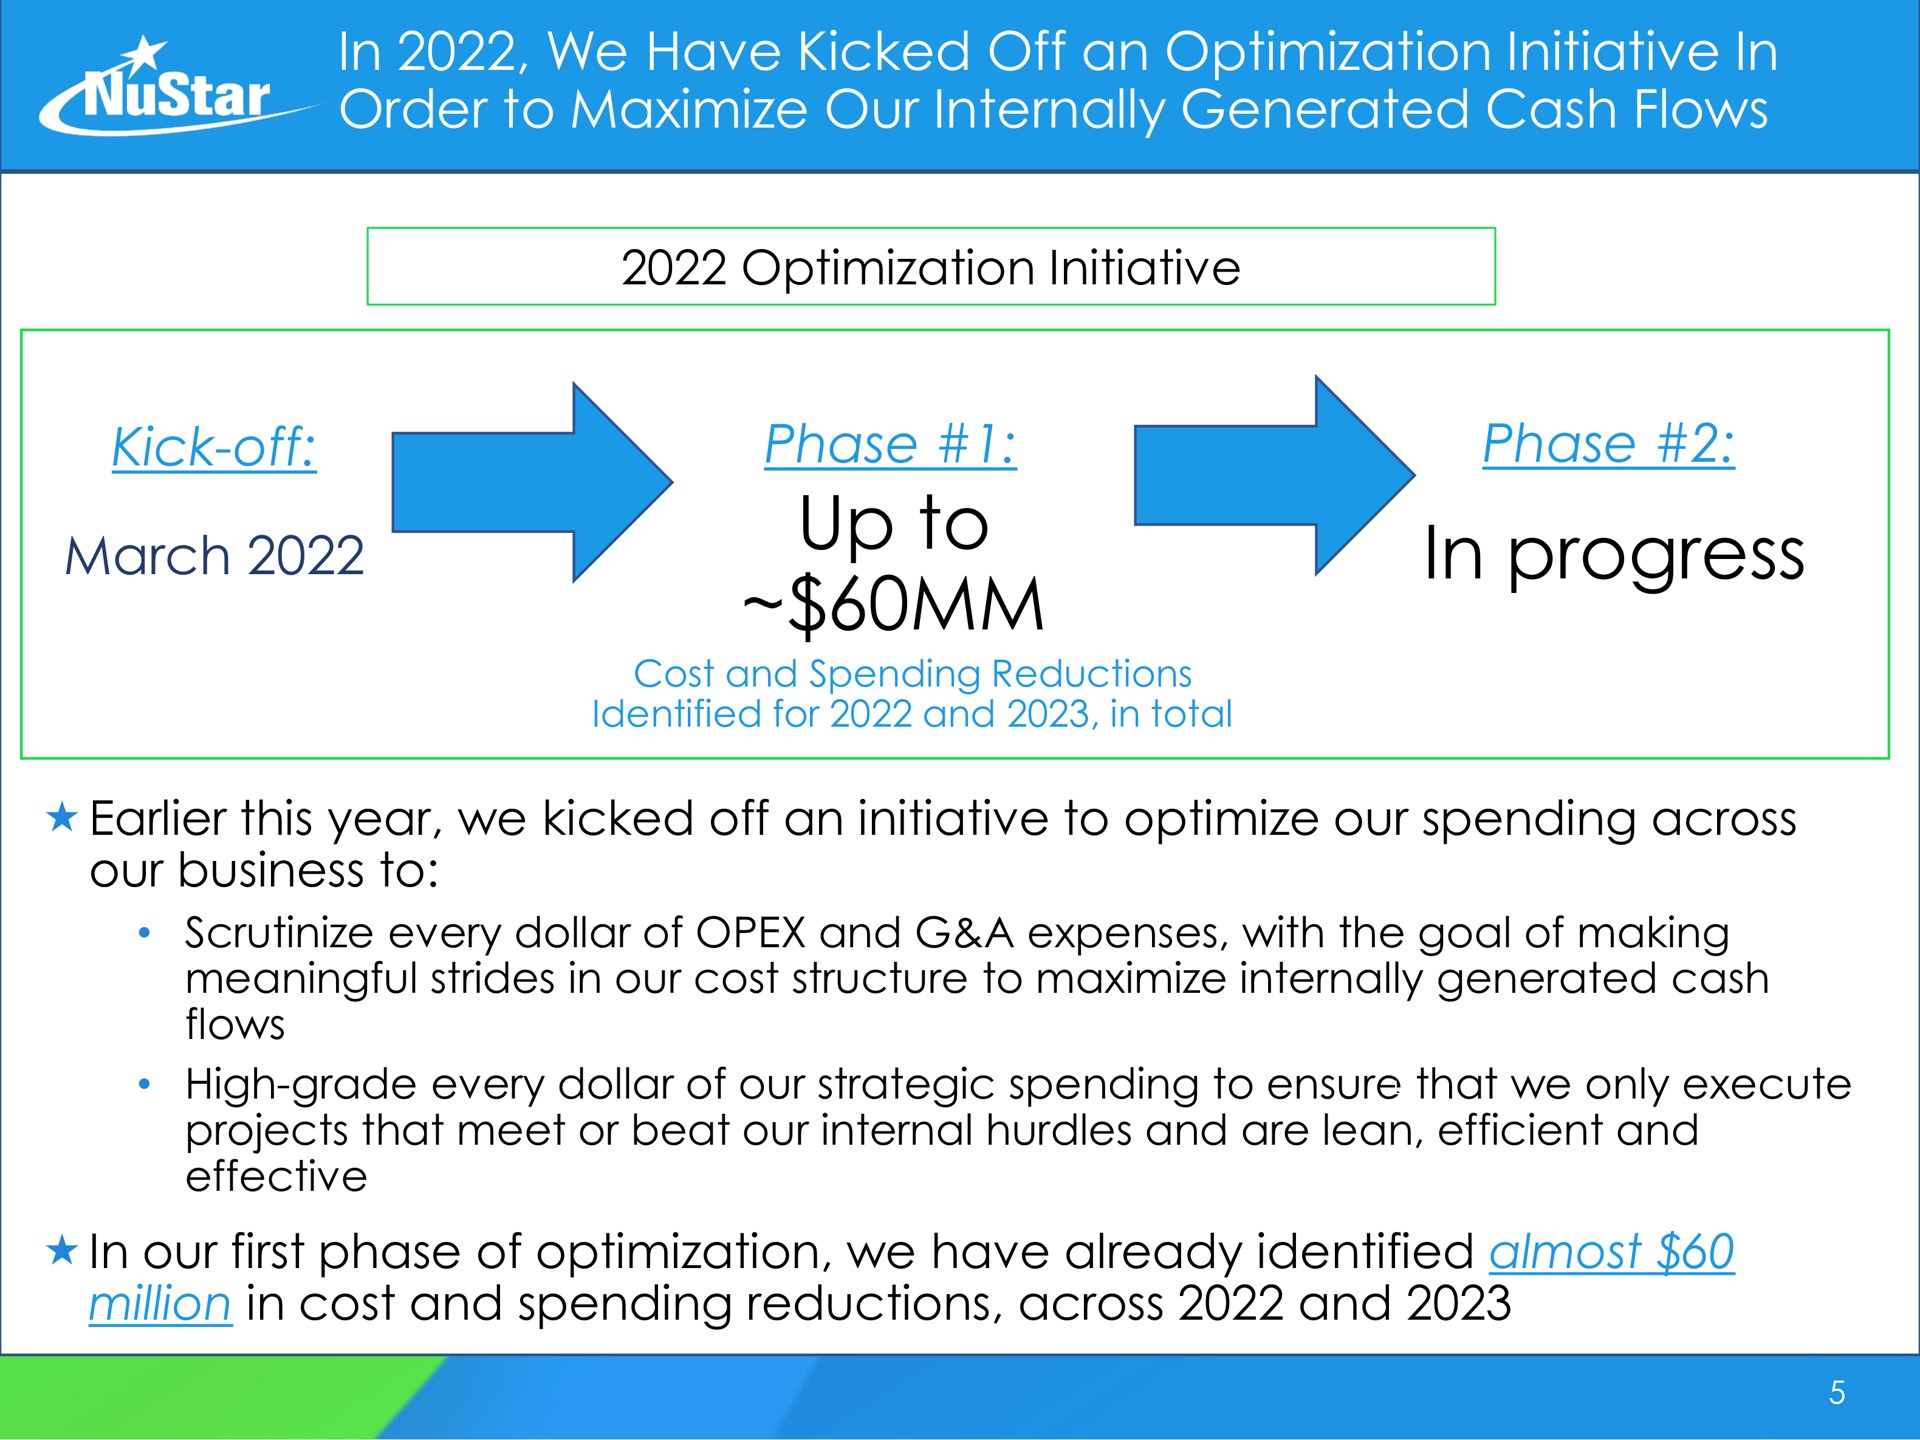 in we have kicked off an optimization initiative in order to maximize our internally generated cash flows kick off march optimization initiative phase up to phase in progress this year we kicked off an initiative to optimize our spending across our business to in our first phase of optimization we have already identified almost million in cost and spending reductions across and attire | NuStar Energy